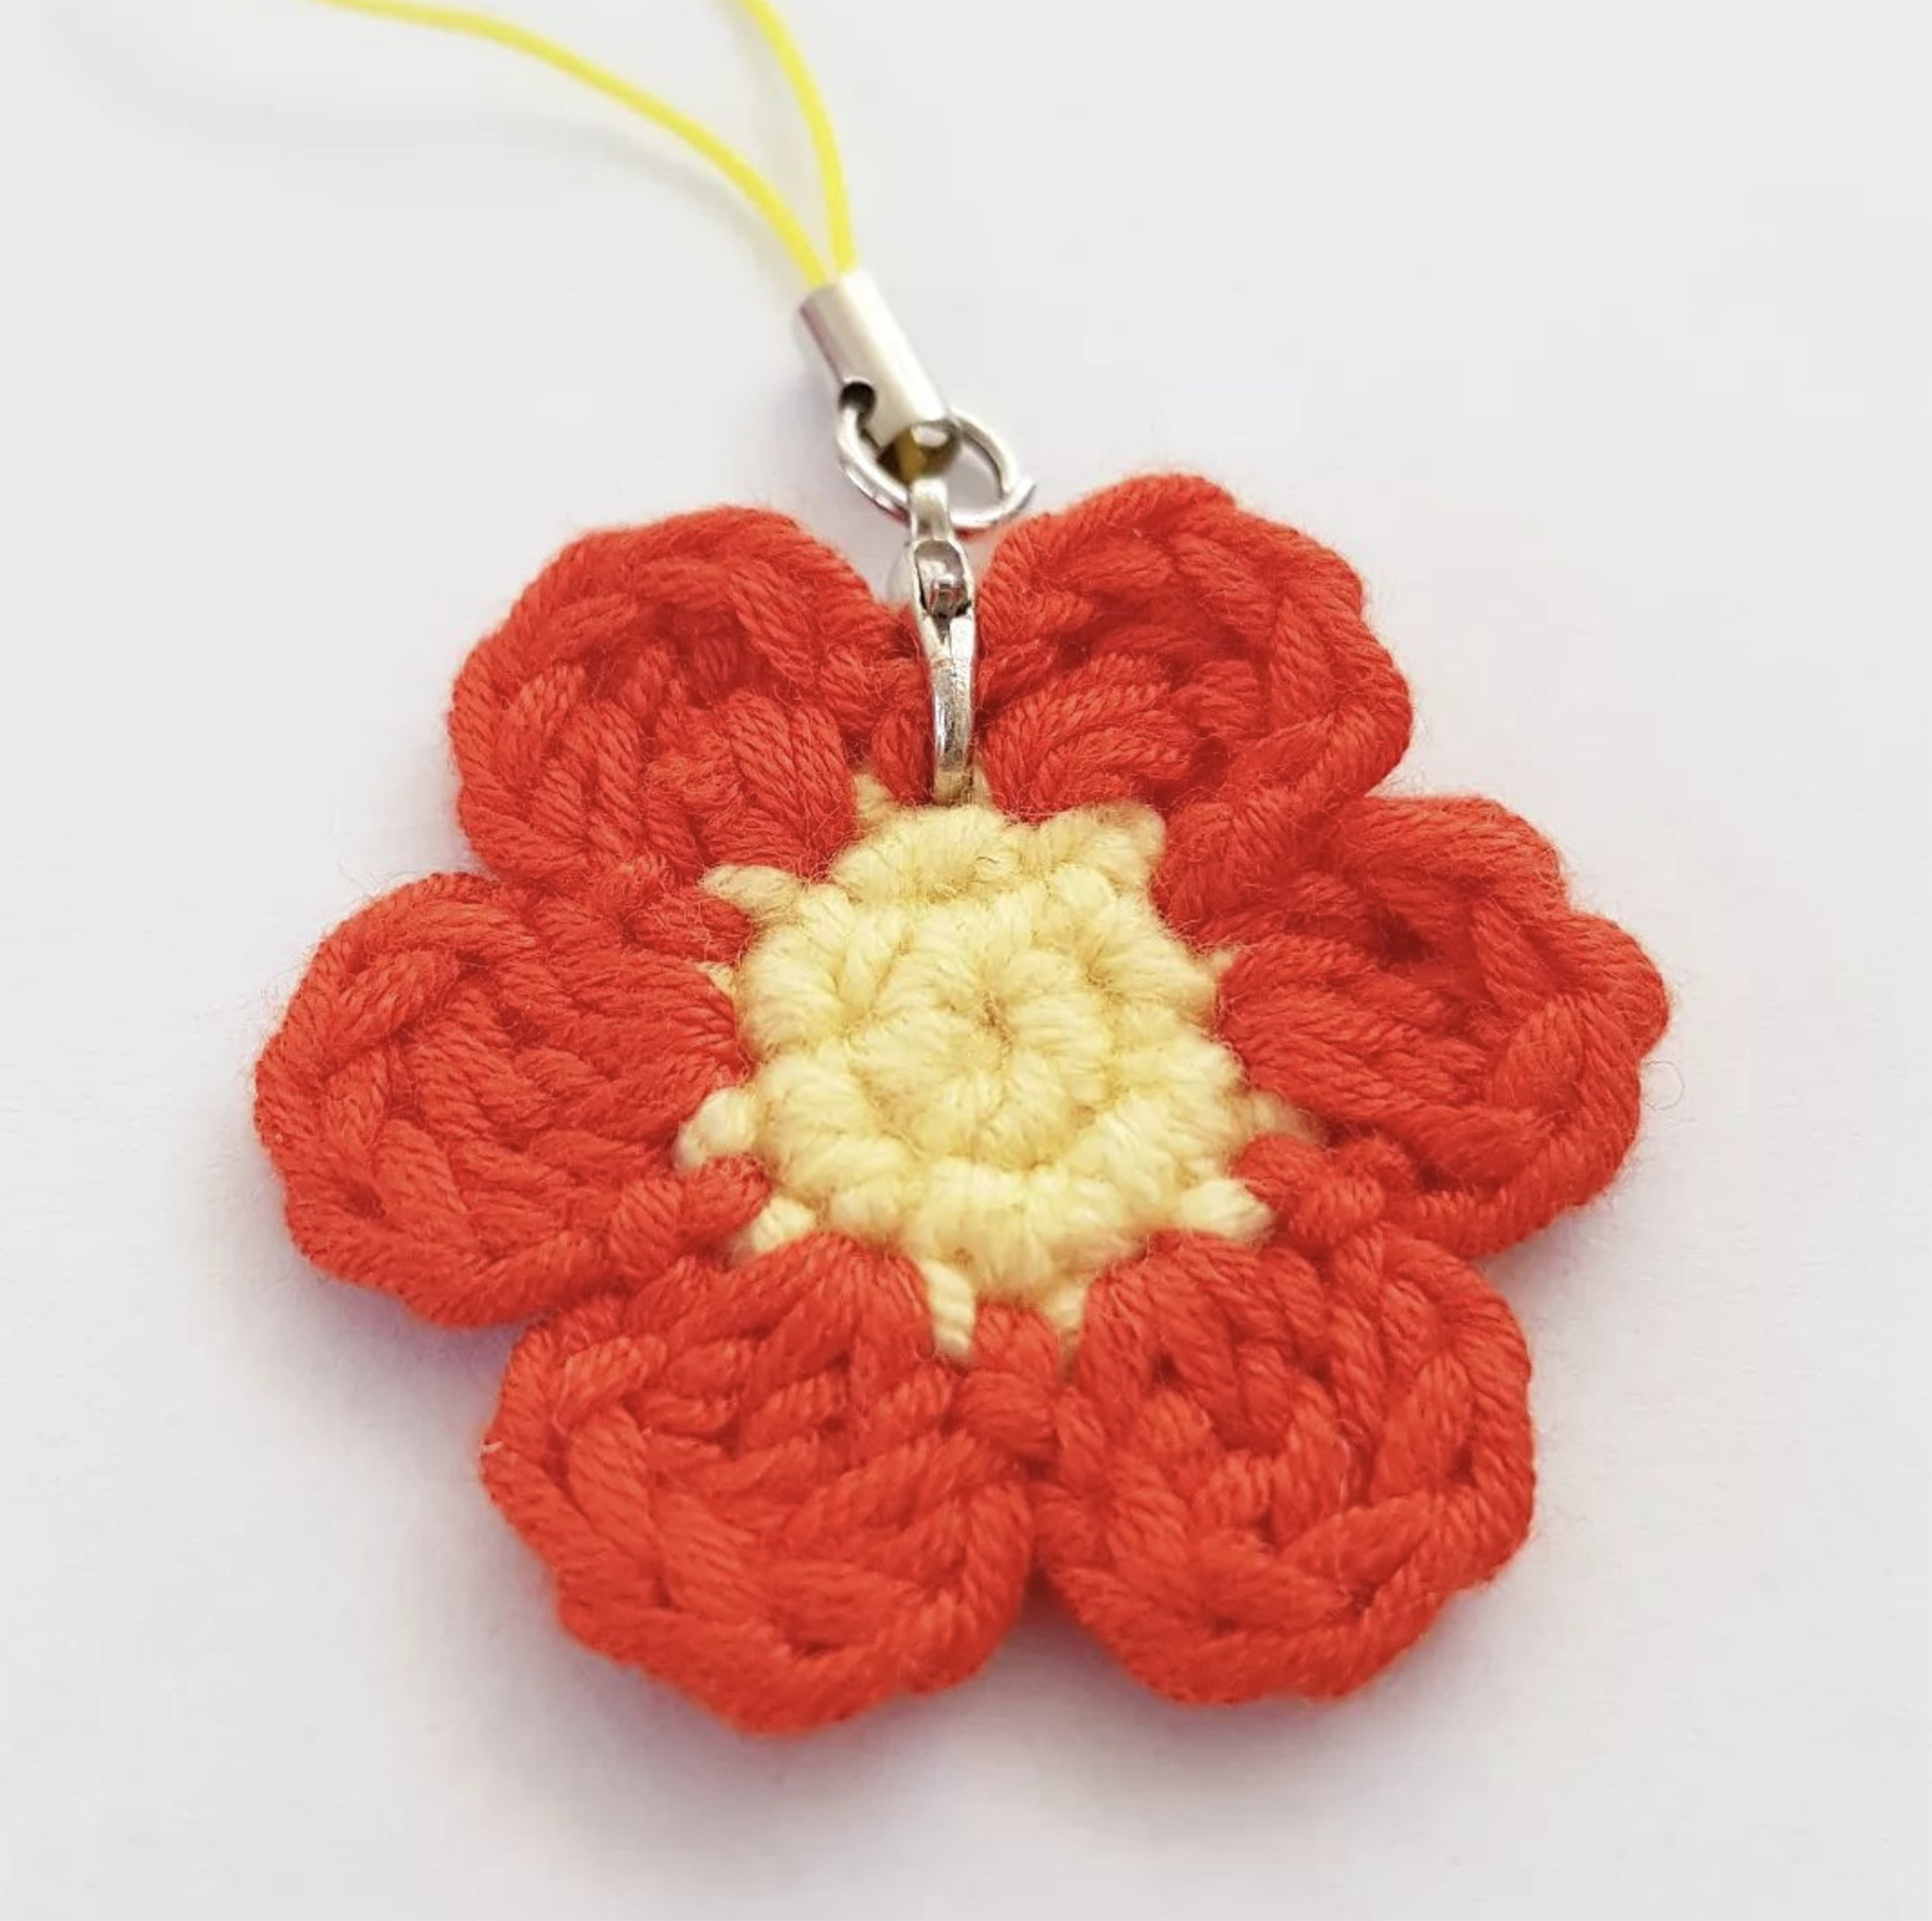 "Whimsical Floral Charms: Artisan Crochet Keychains for Every Occasion"